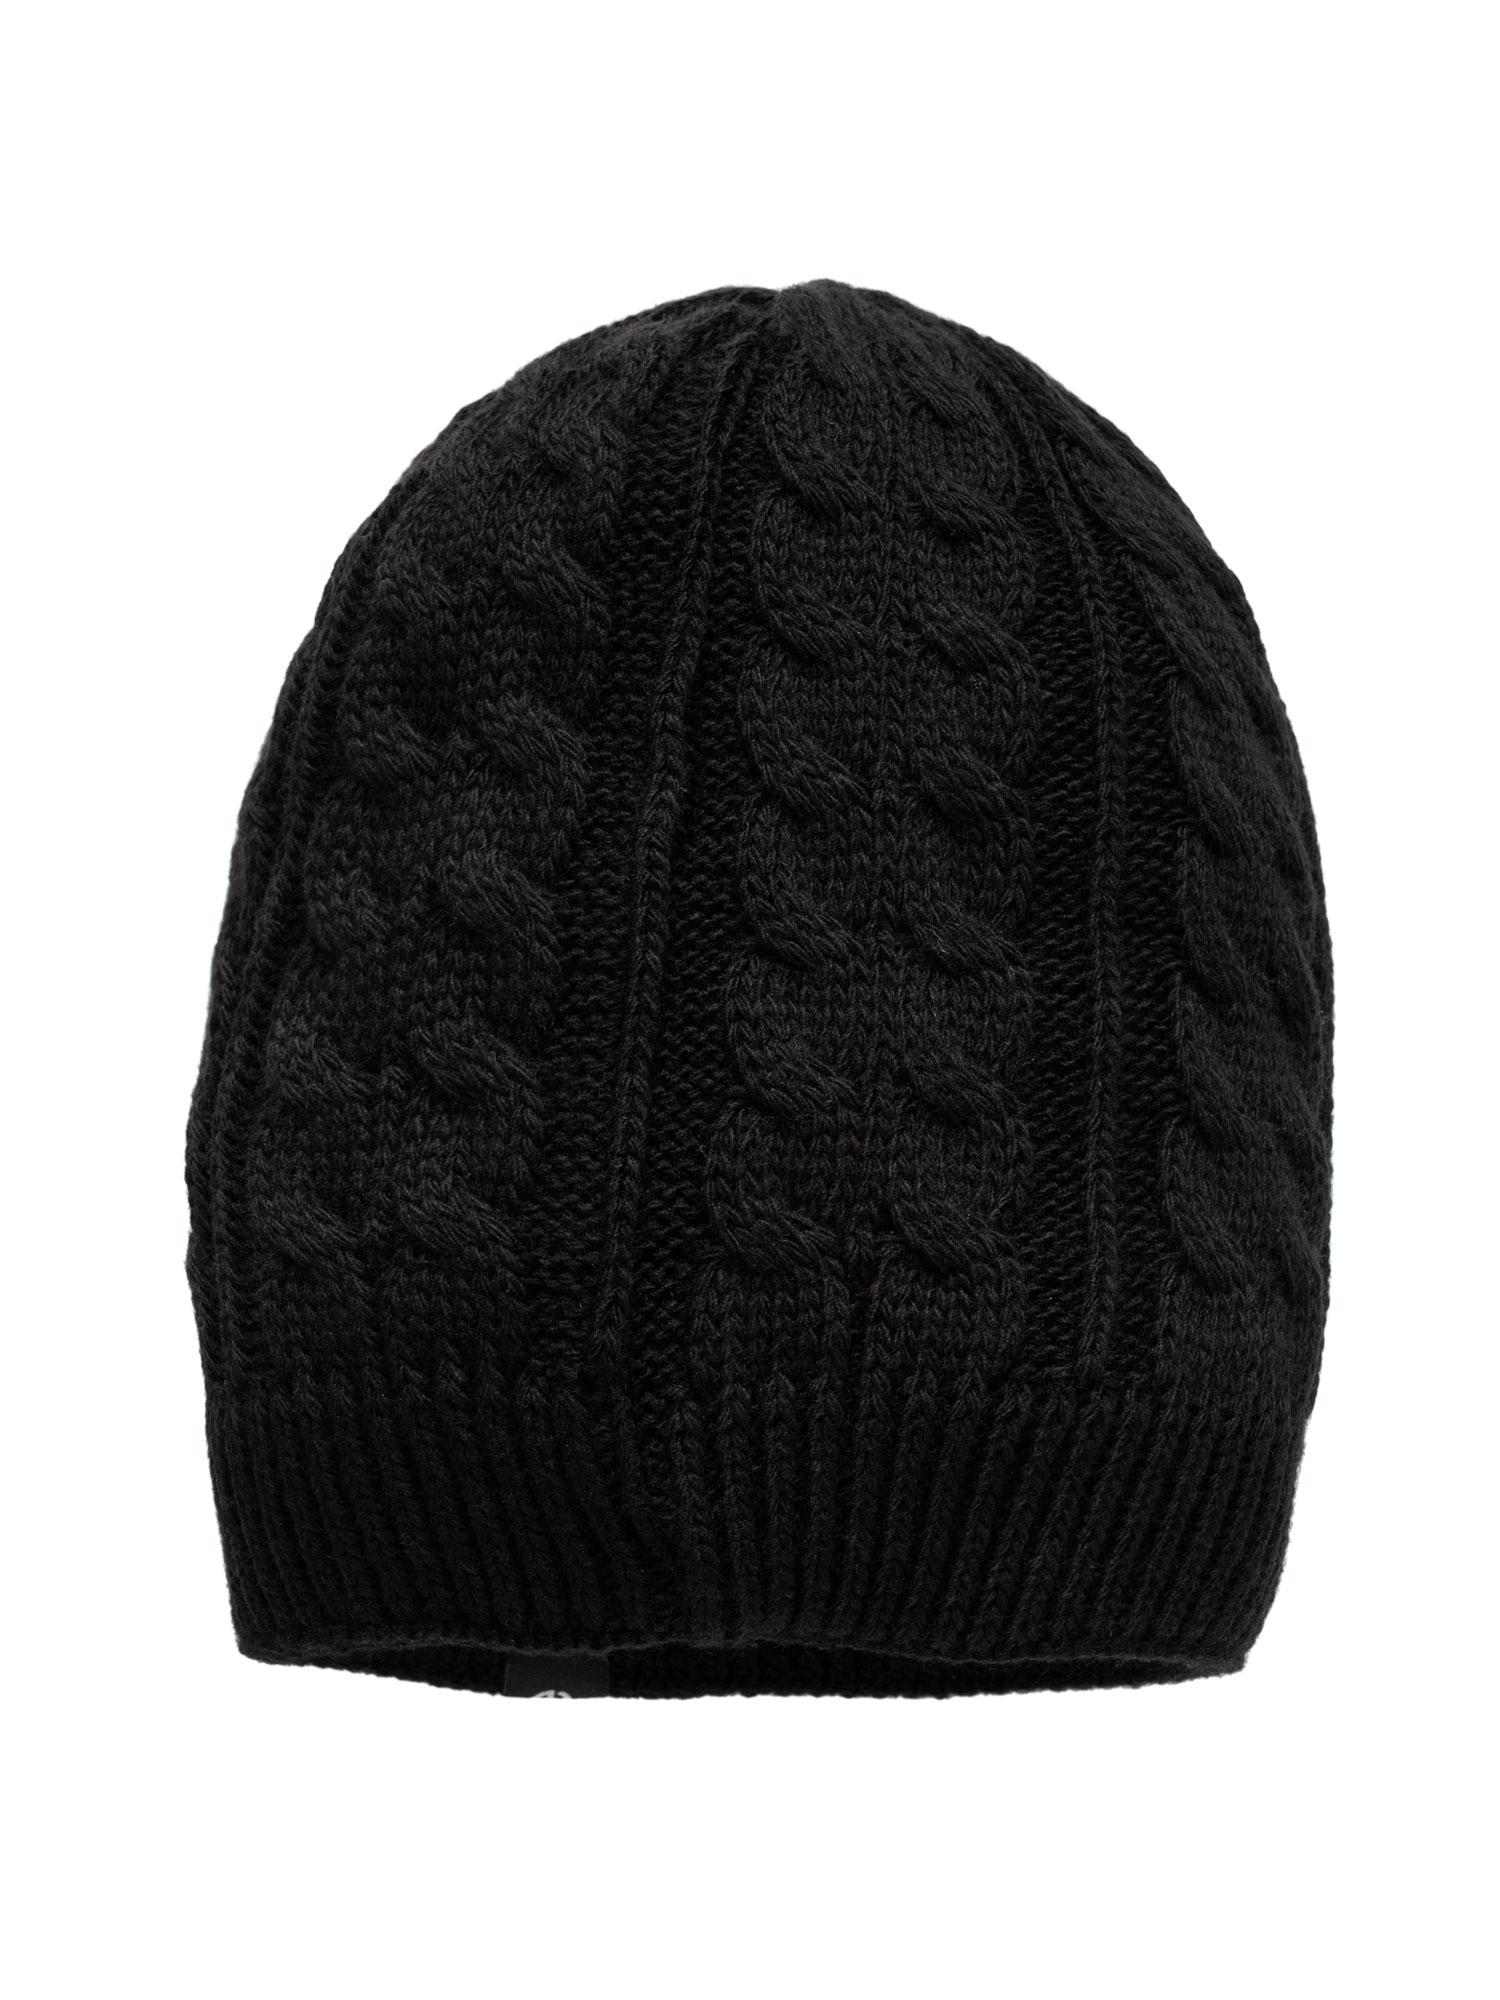 Selected image for BRILLE Muška kapa Men's beanie crna